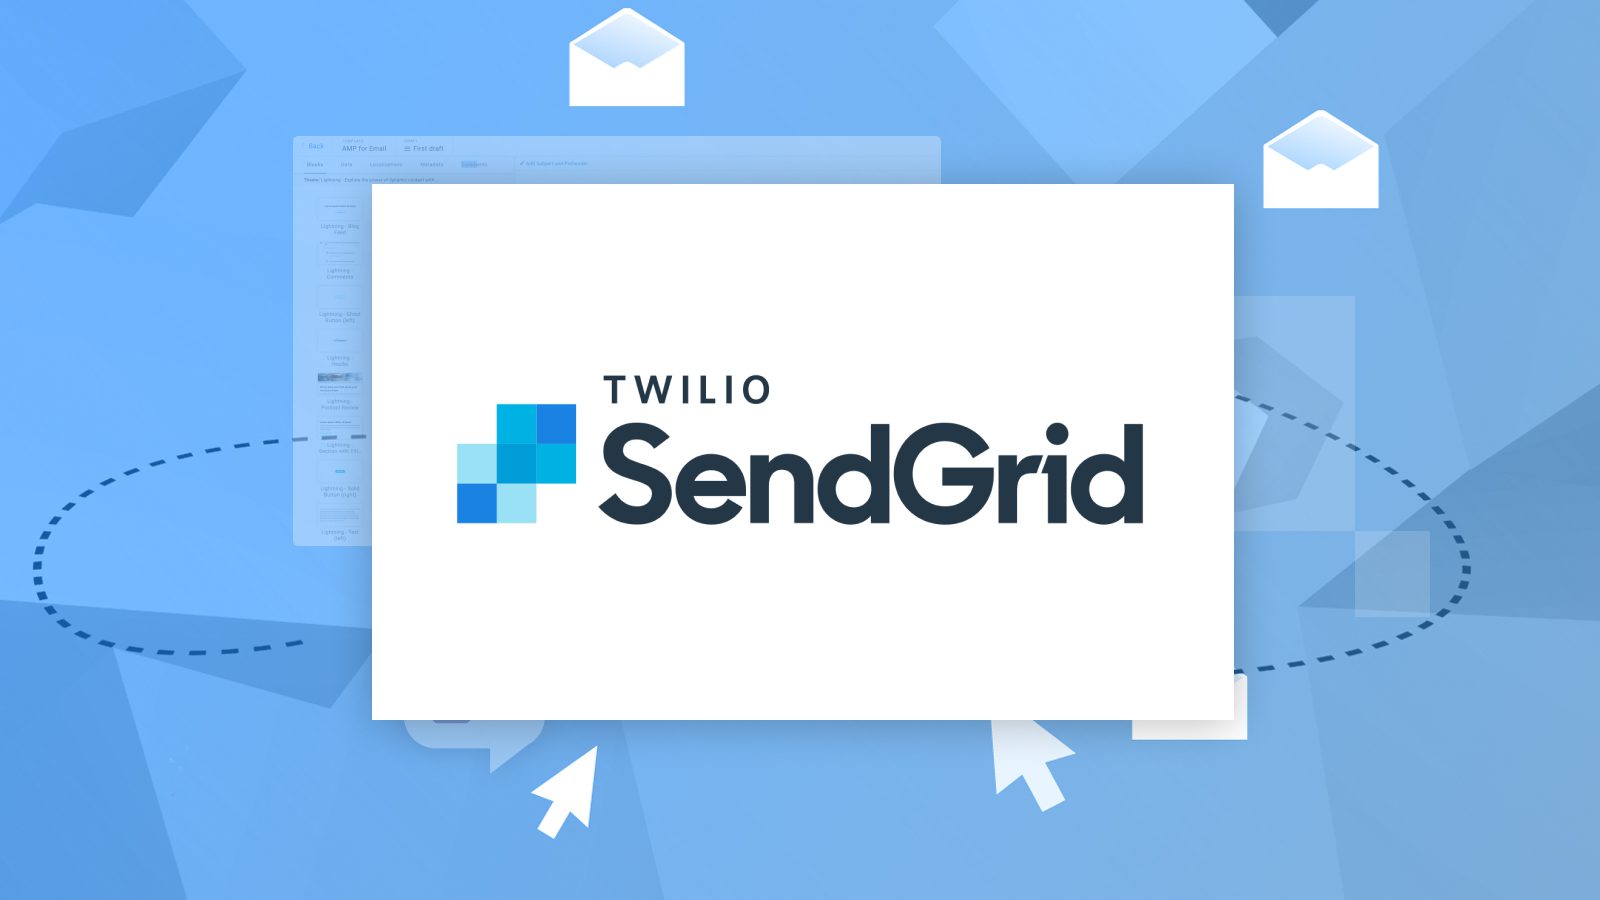 sync email templates to sendgrid, now in dyspatch | dyspatch